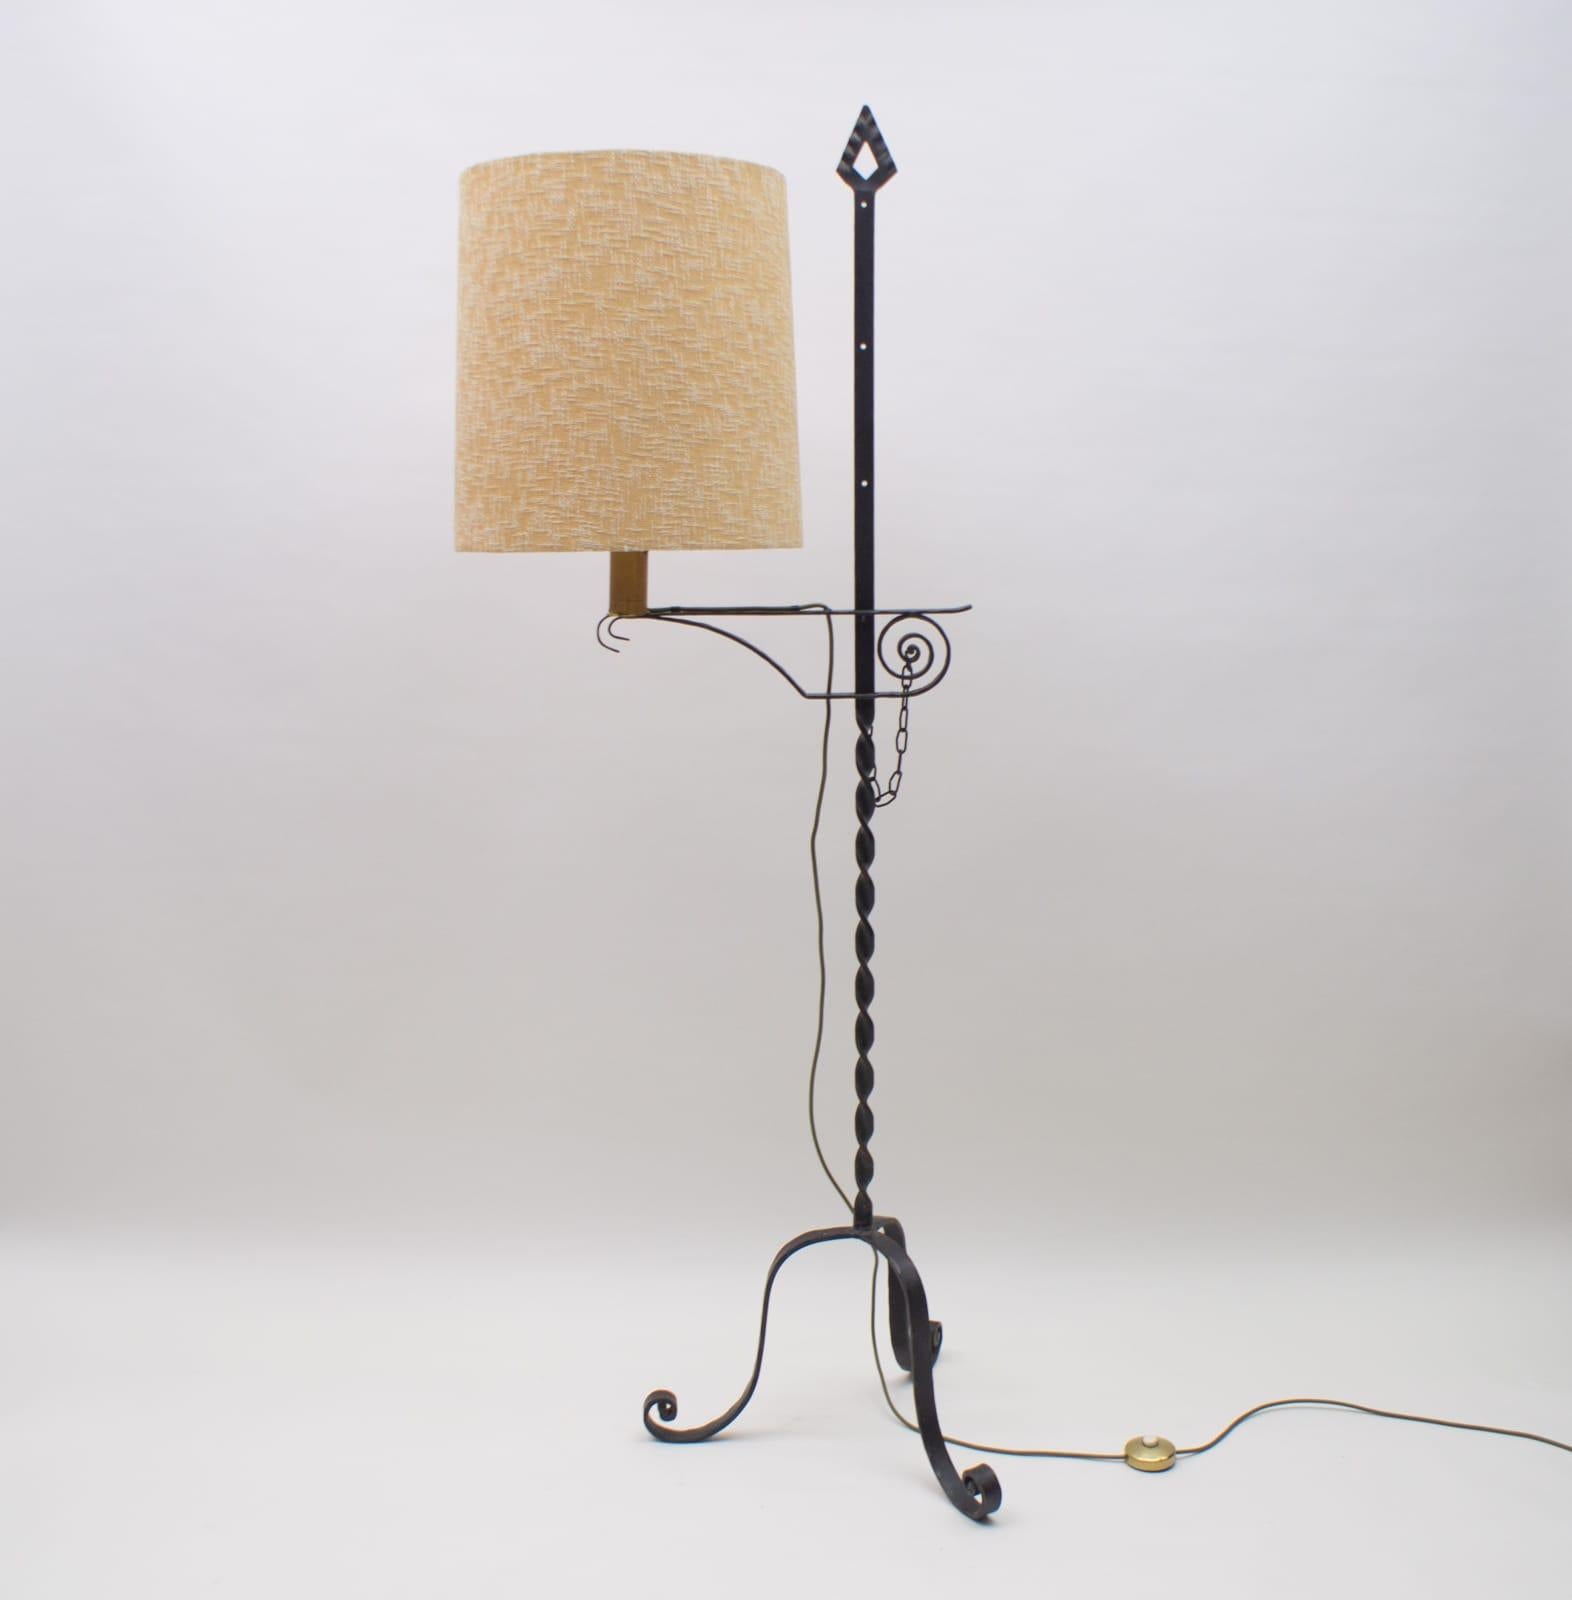 The lampshade can be adjusted in height four times.

Fantastic handmade. 

The height is from 178cm to about 228cm.